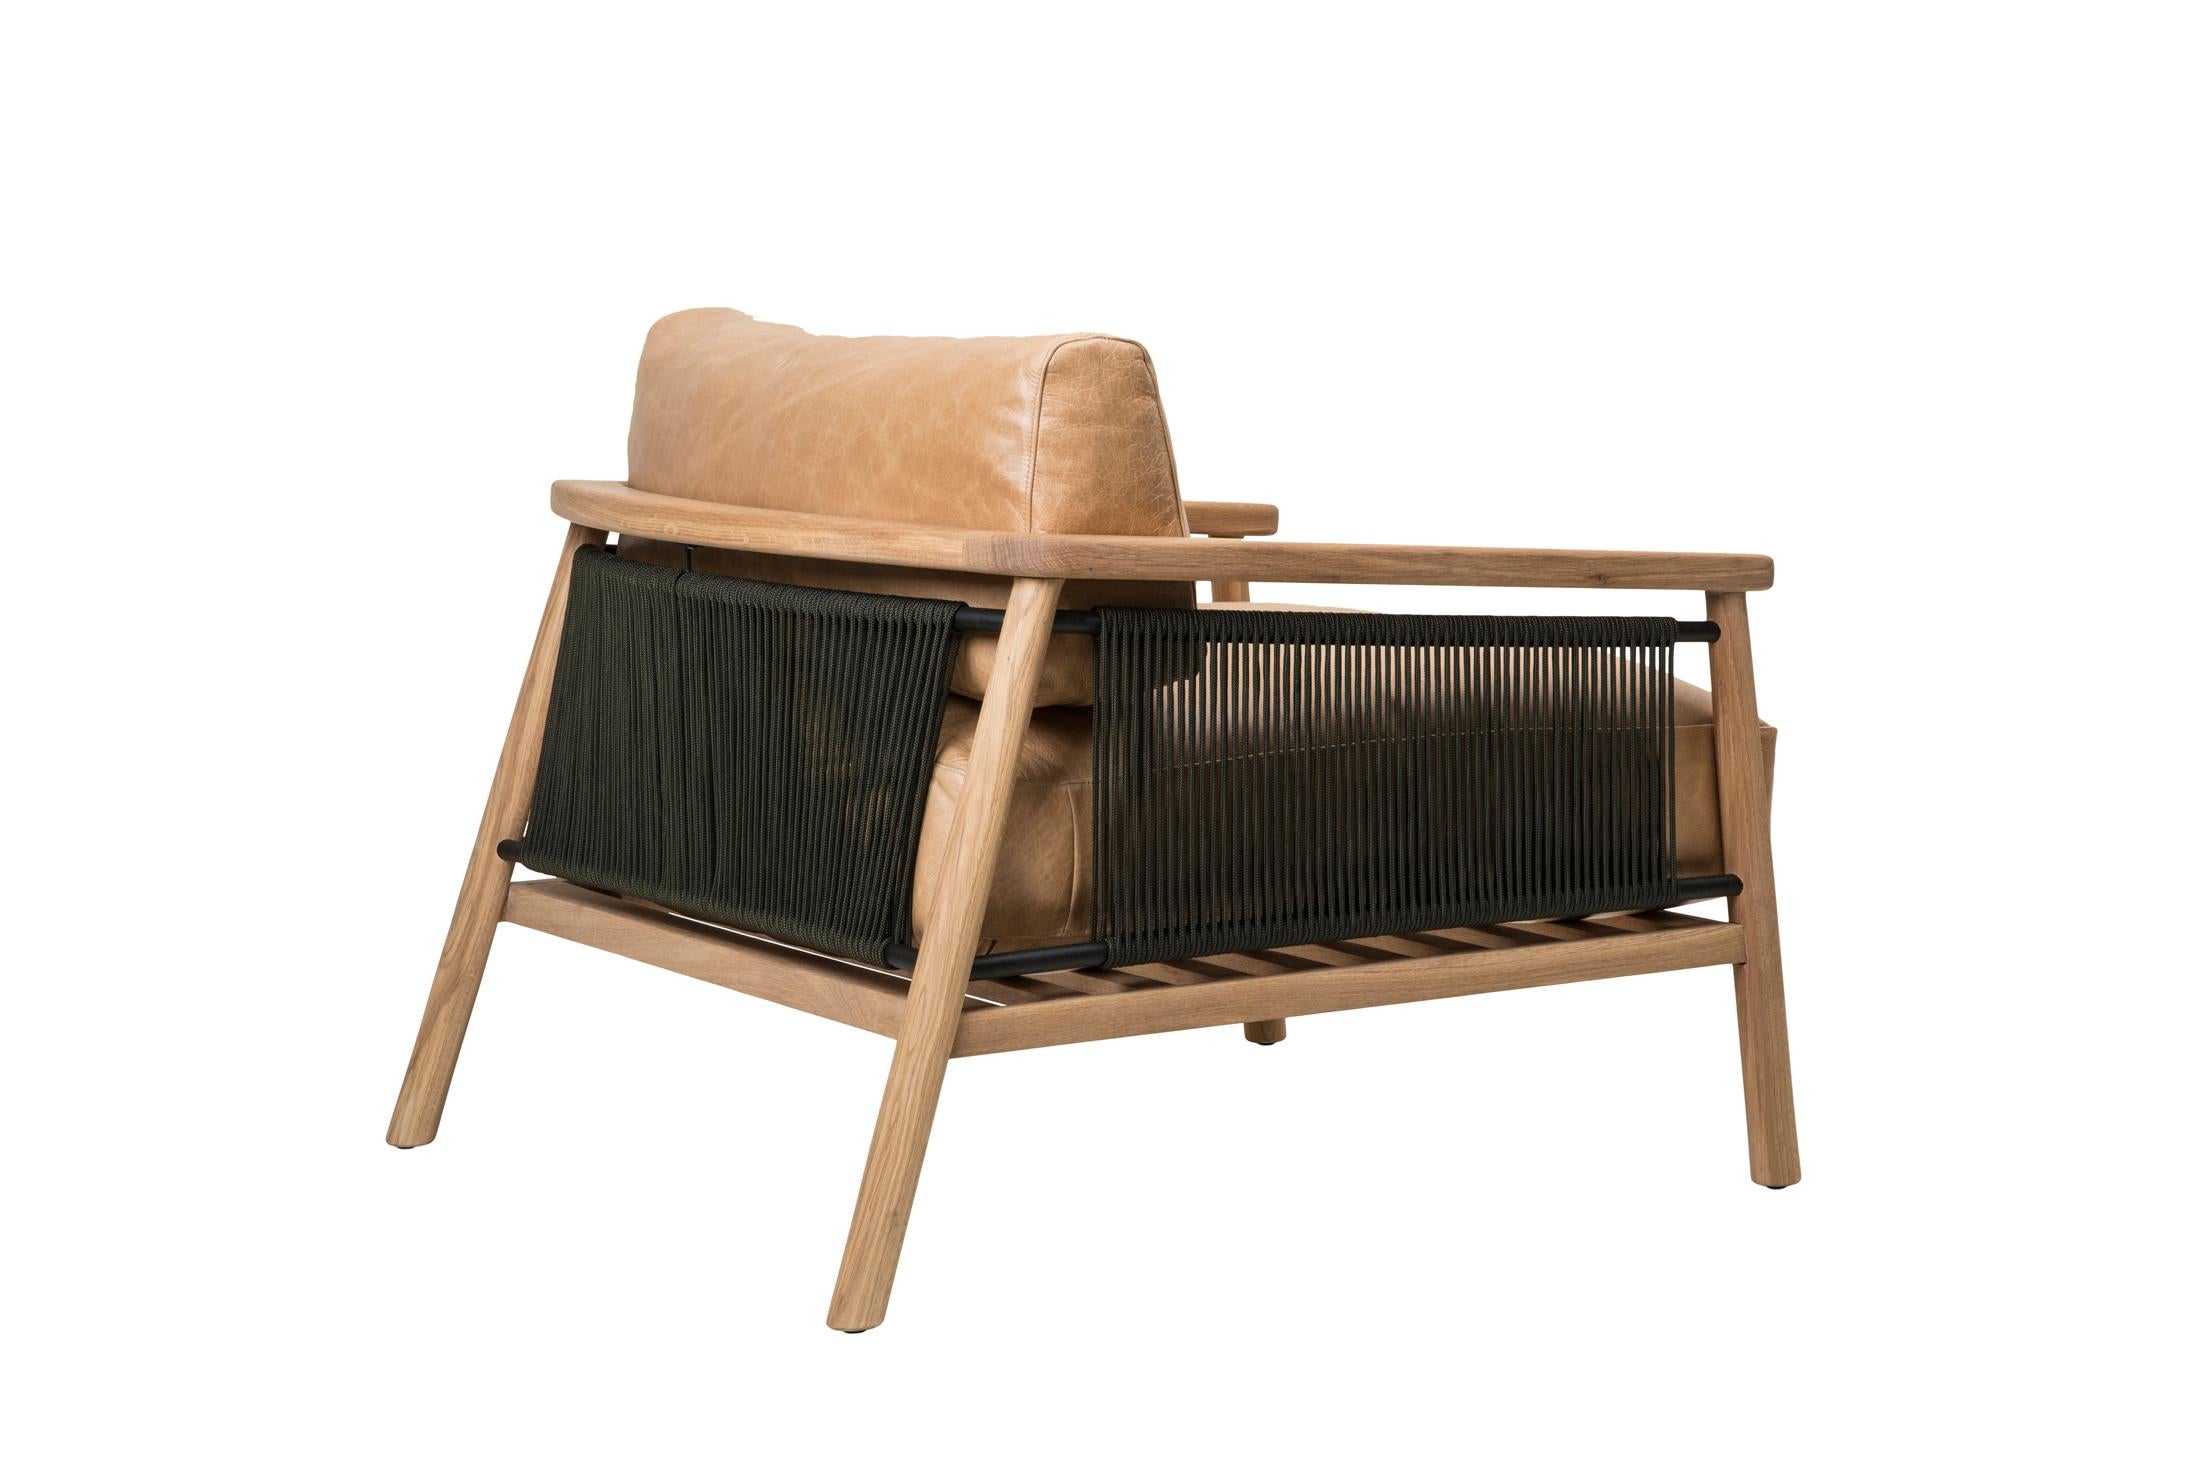 Providing a casual and modern safari aesthetic, the Imboko chair serves both style and comfort. The oversized leather cushions rest on a solid American Oak timber frame while the combination of steel and cording provide an airy accent. 
